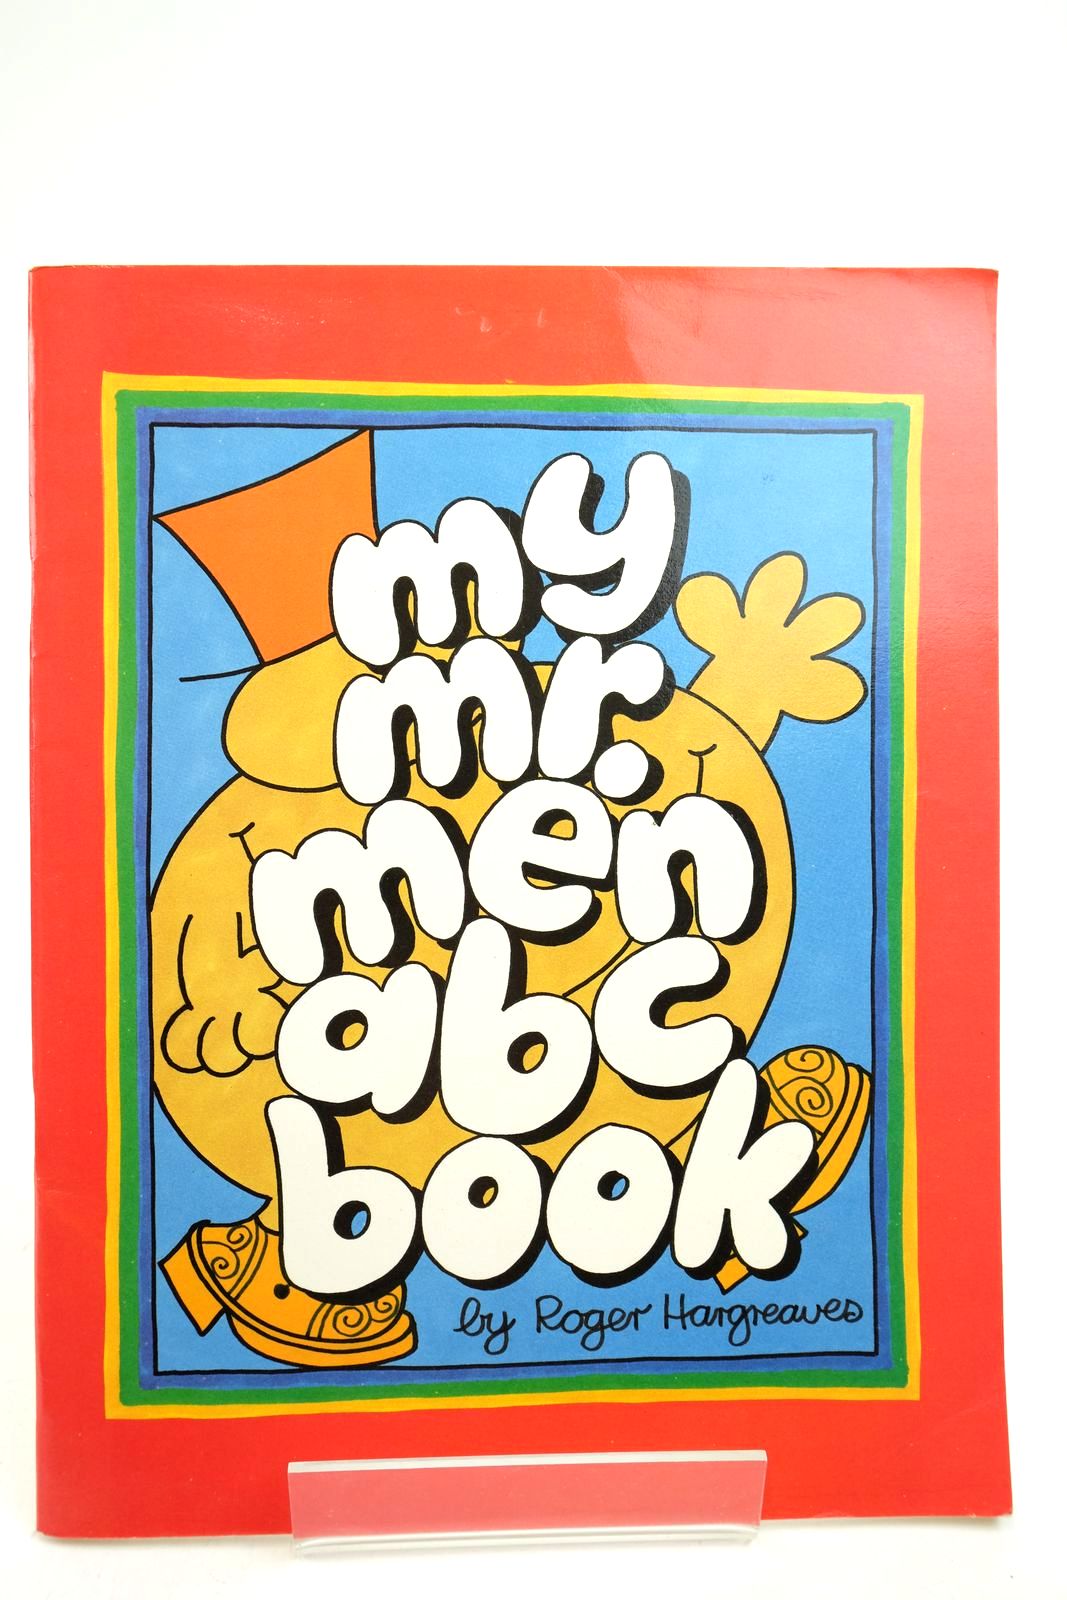 Photo of THE MR. MEN ABC written by Hargreaves, Roger illustrated by Hargreaves, Roger published by Thurman Publishing (STOCK CODE: 2140342)  for sale by Stella & Rose's Books